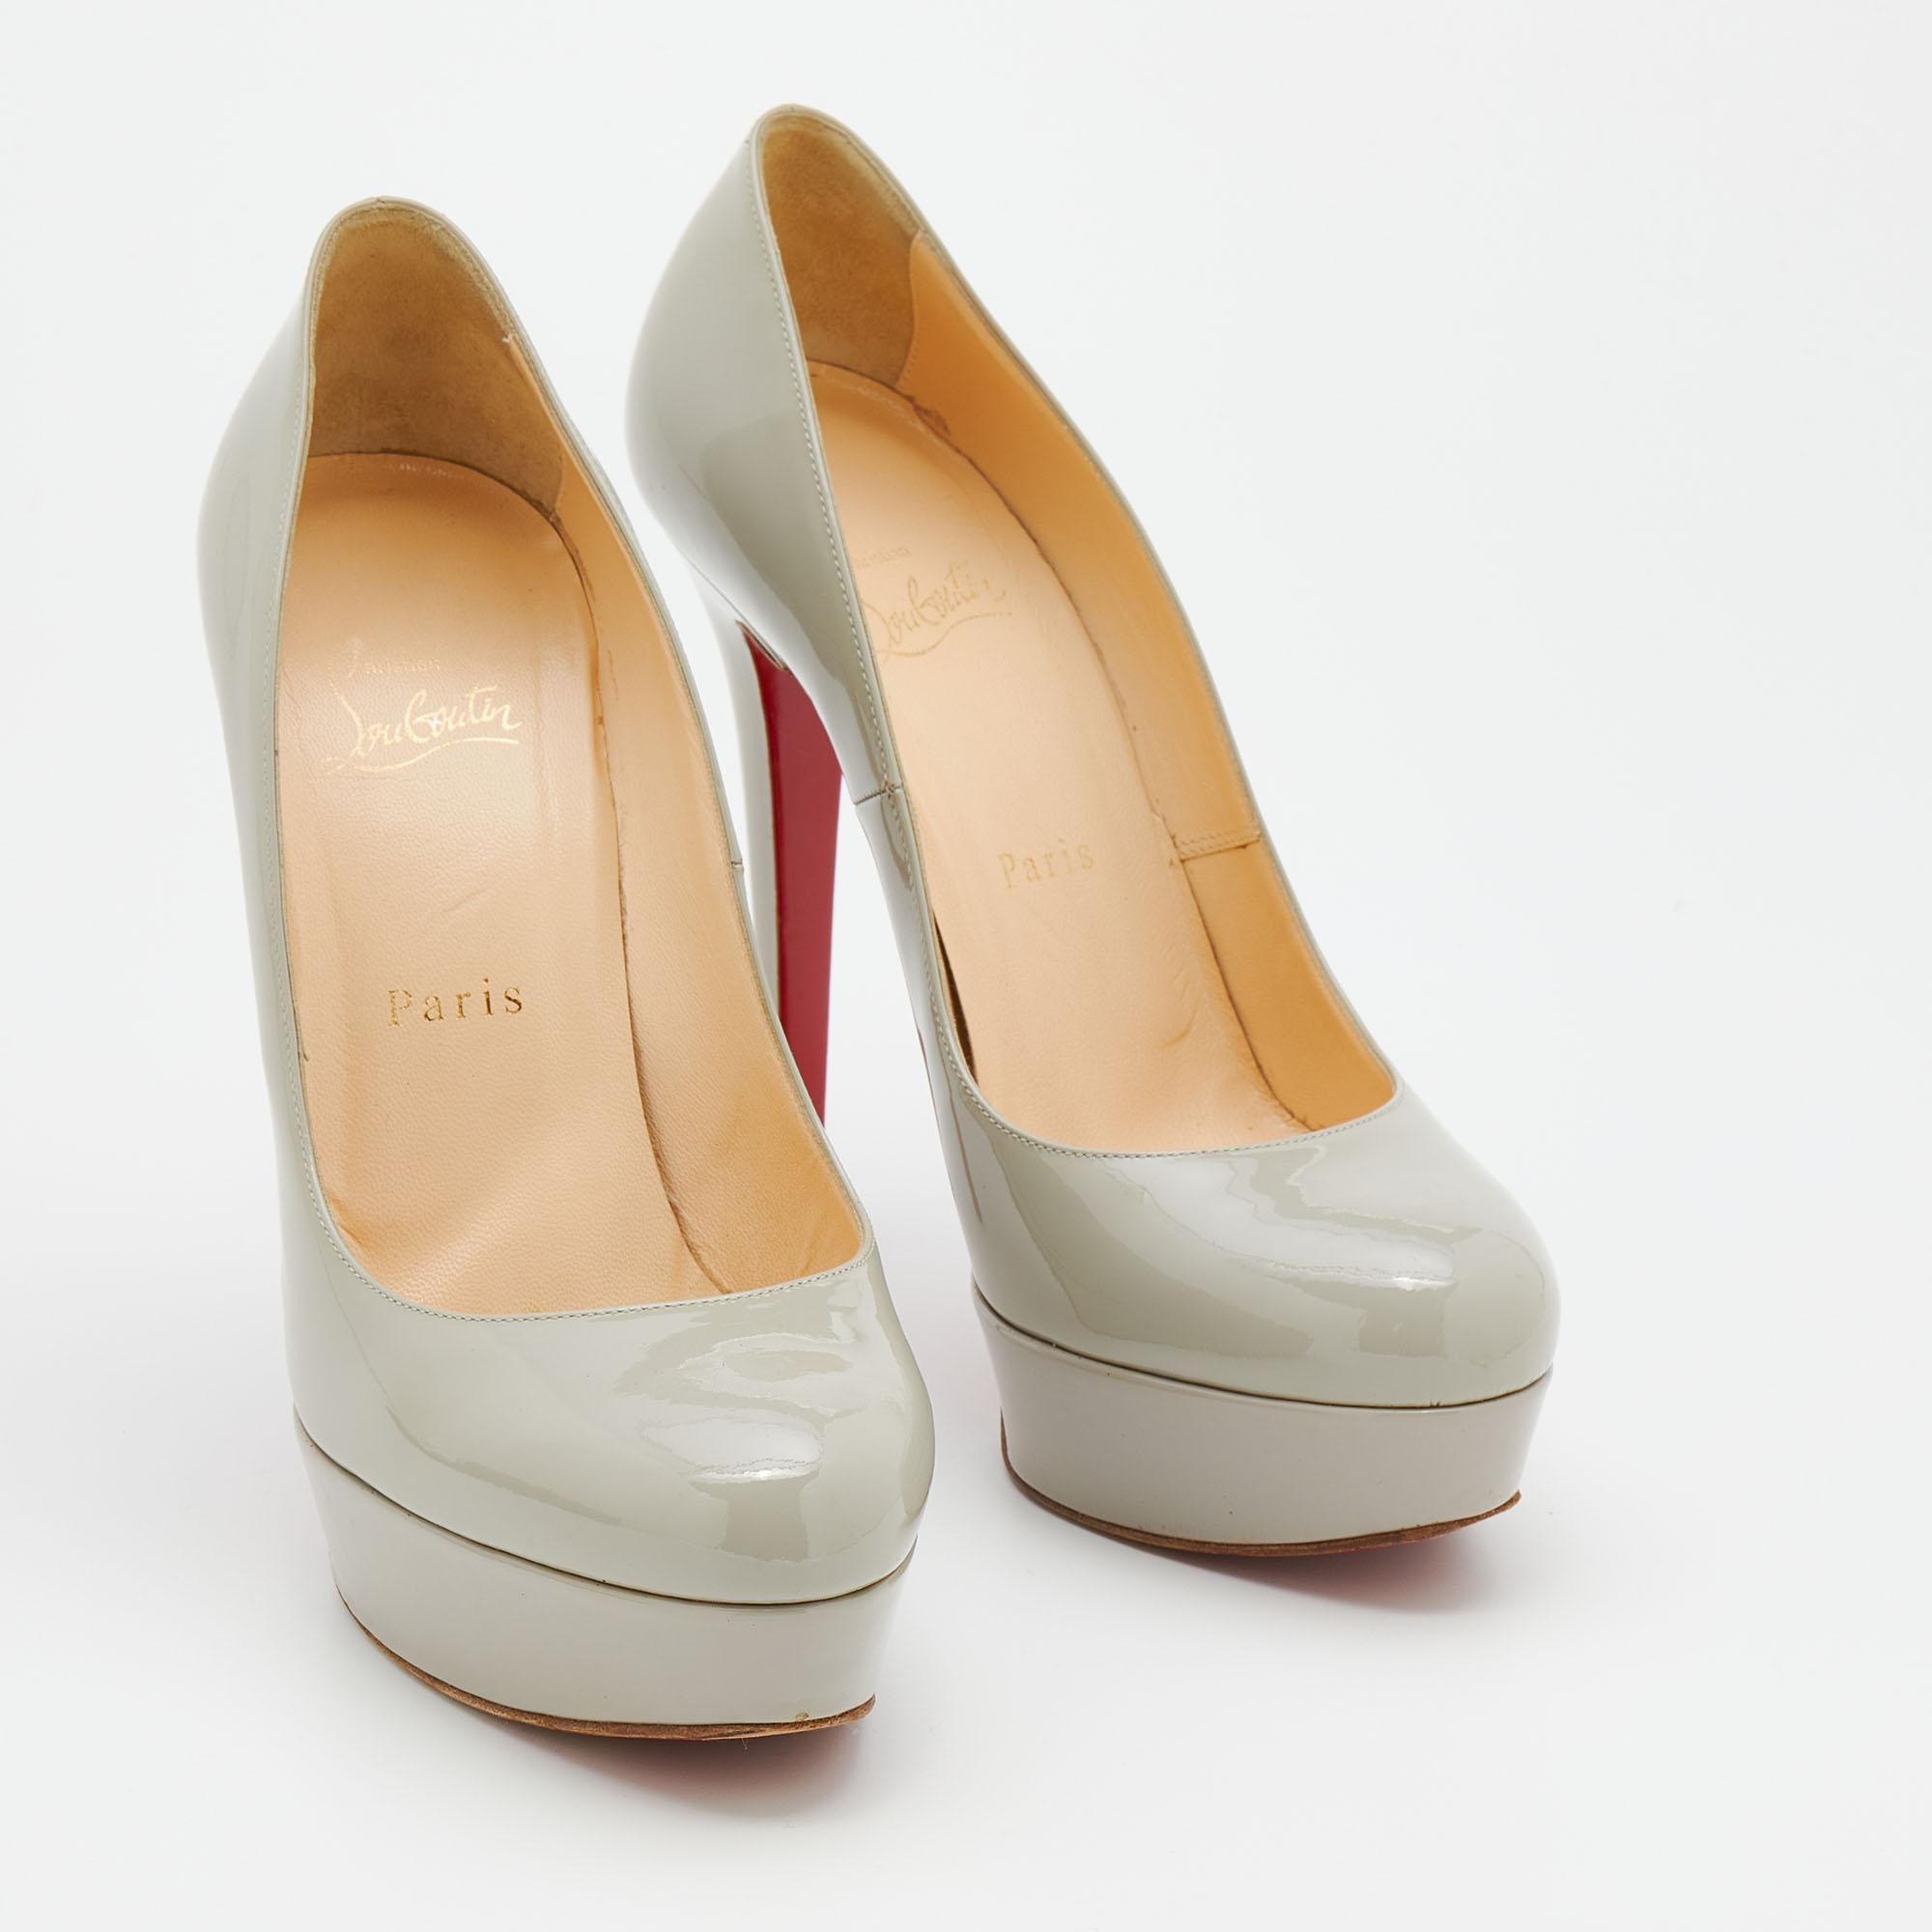 Every flawless design of Christian Louboutin, like this pair of Bianca pumps, is the epitome of feminine style. Crafted from patent leather, its grey upper is balanced on 13cm heels and platforms. The signature red-lacquered sole of these shoes